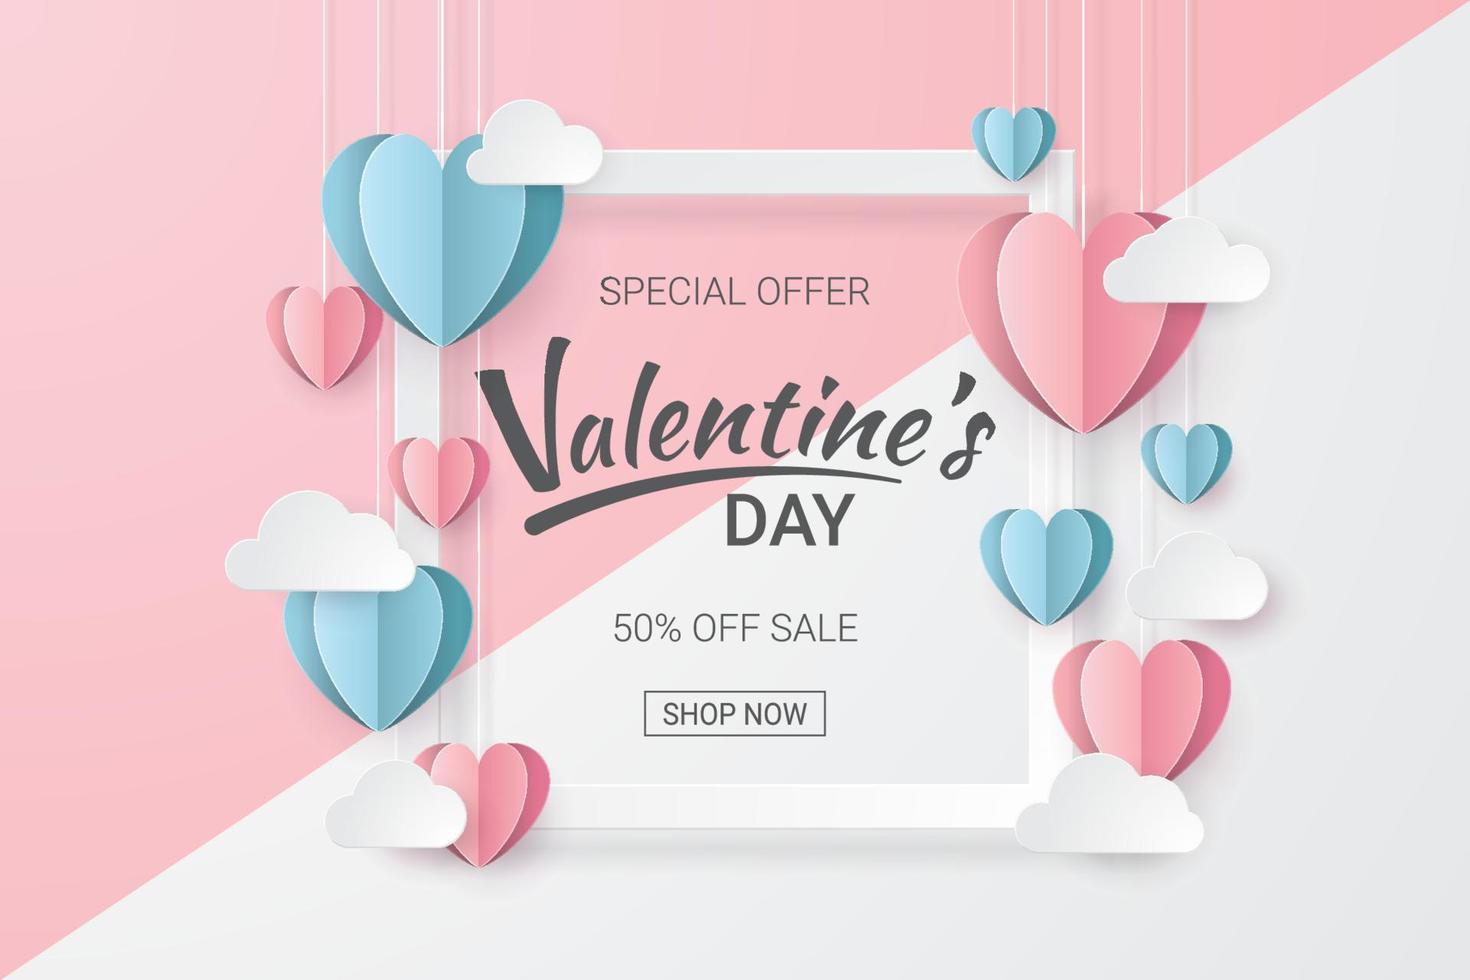 Valentine's Day greeting card. Paper cut style. Vector illustration